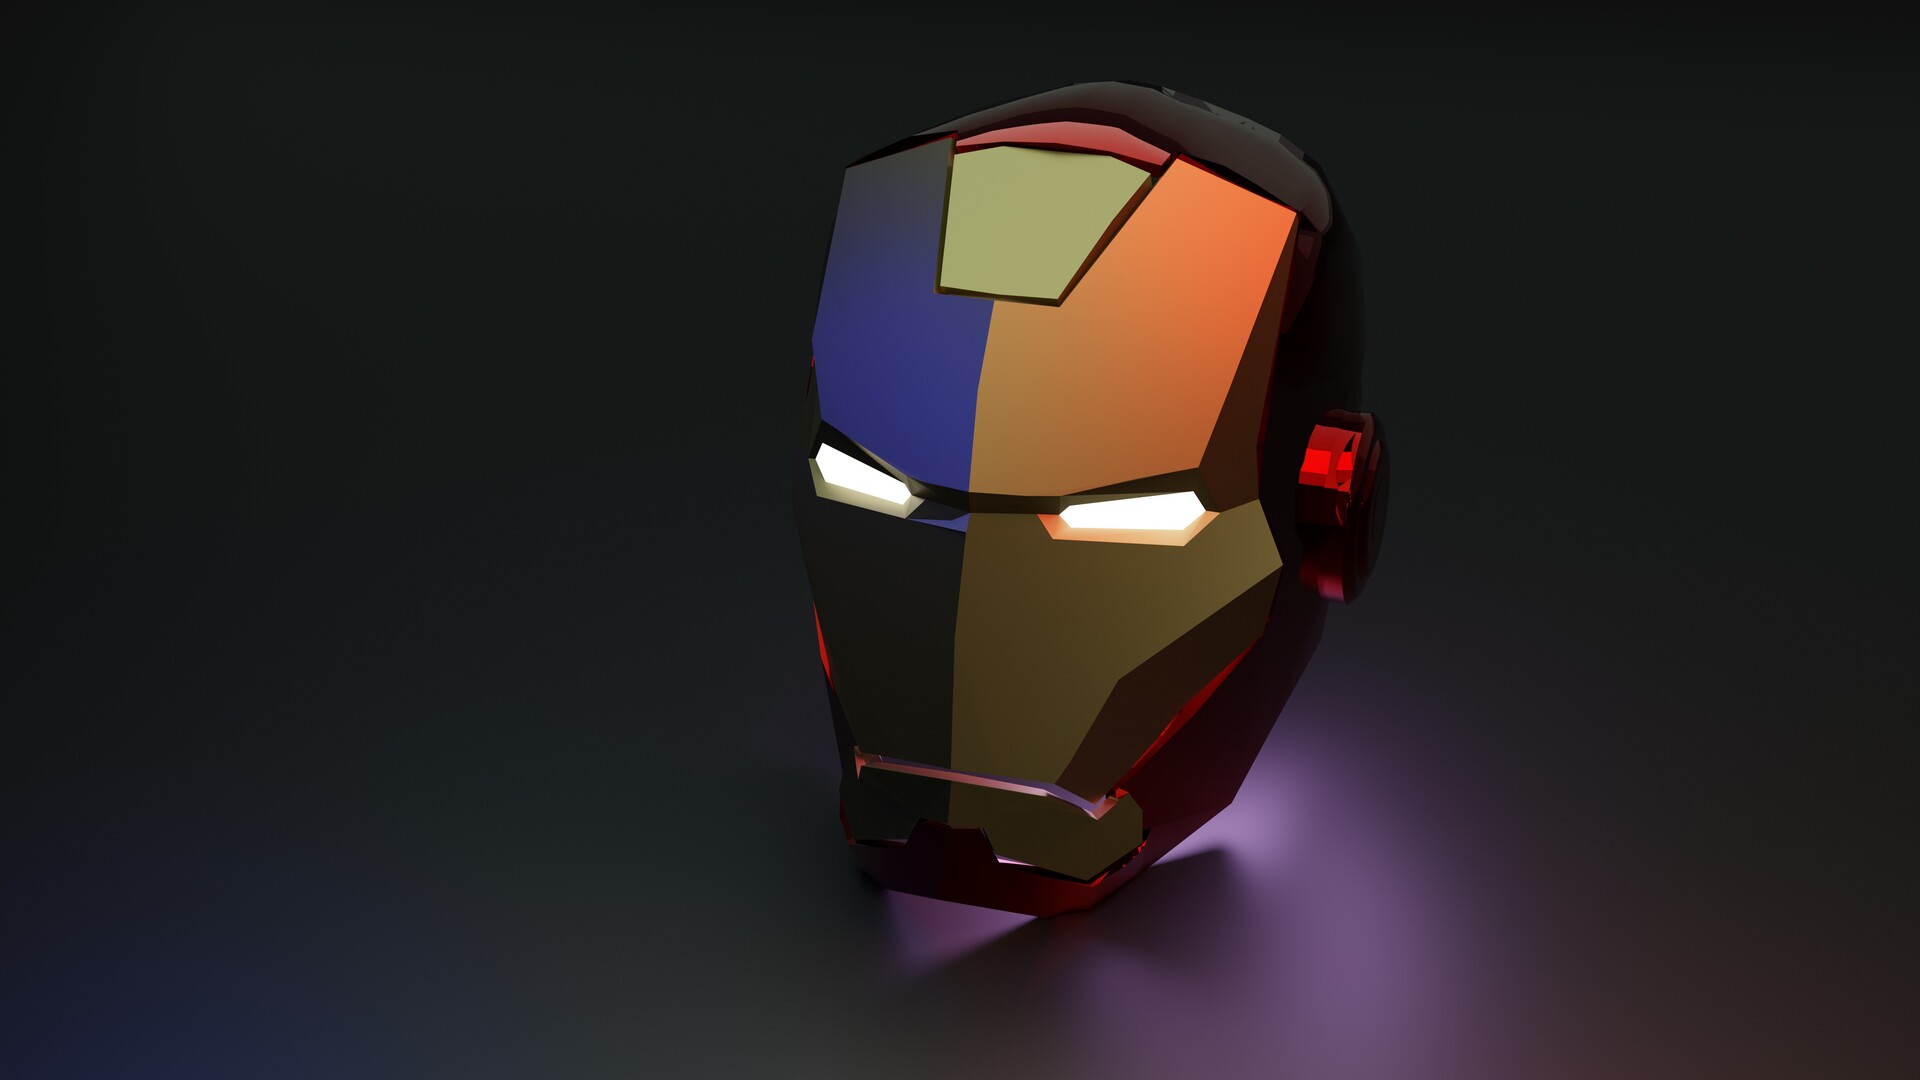 ArtStation - A Tribute to Our Ironman In 3d way